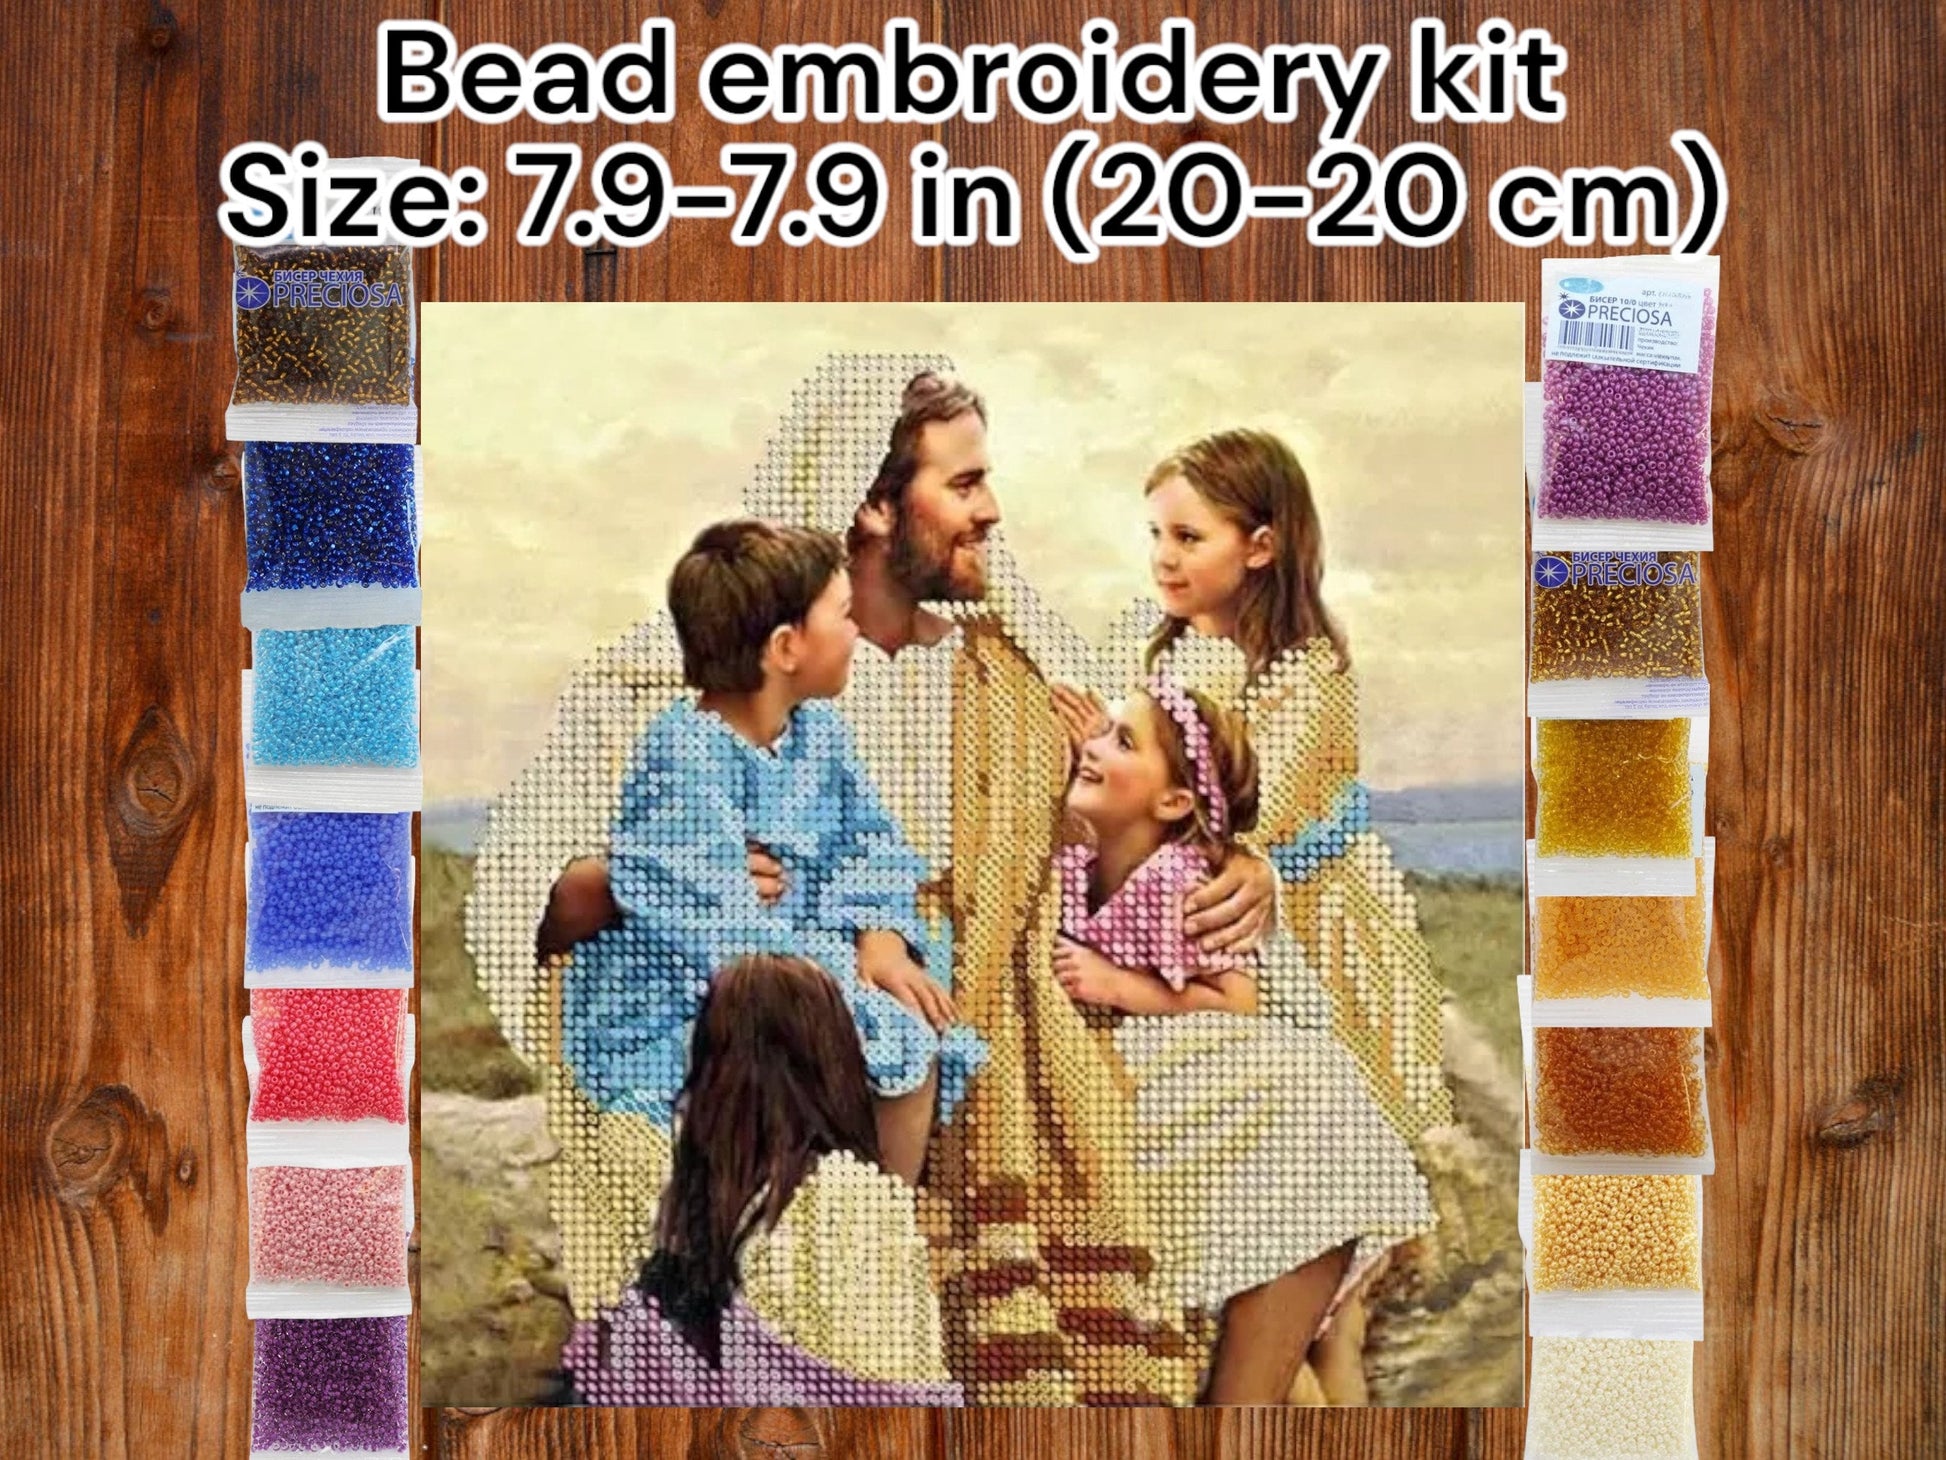 DIY Bead embroidery kit "Jesus and children". Size: 7.9-7.9 in (20-20 cm) - VadymShop